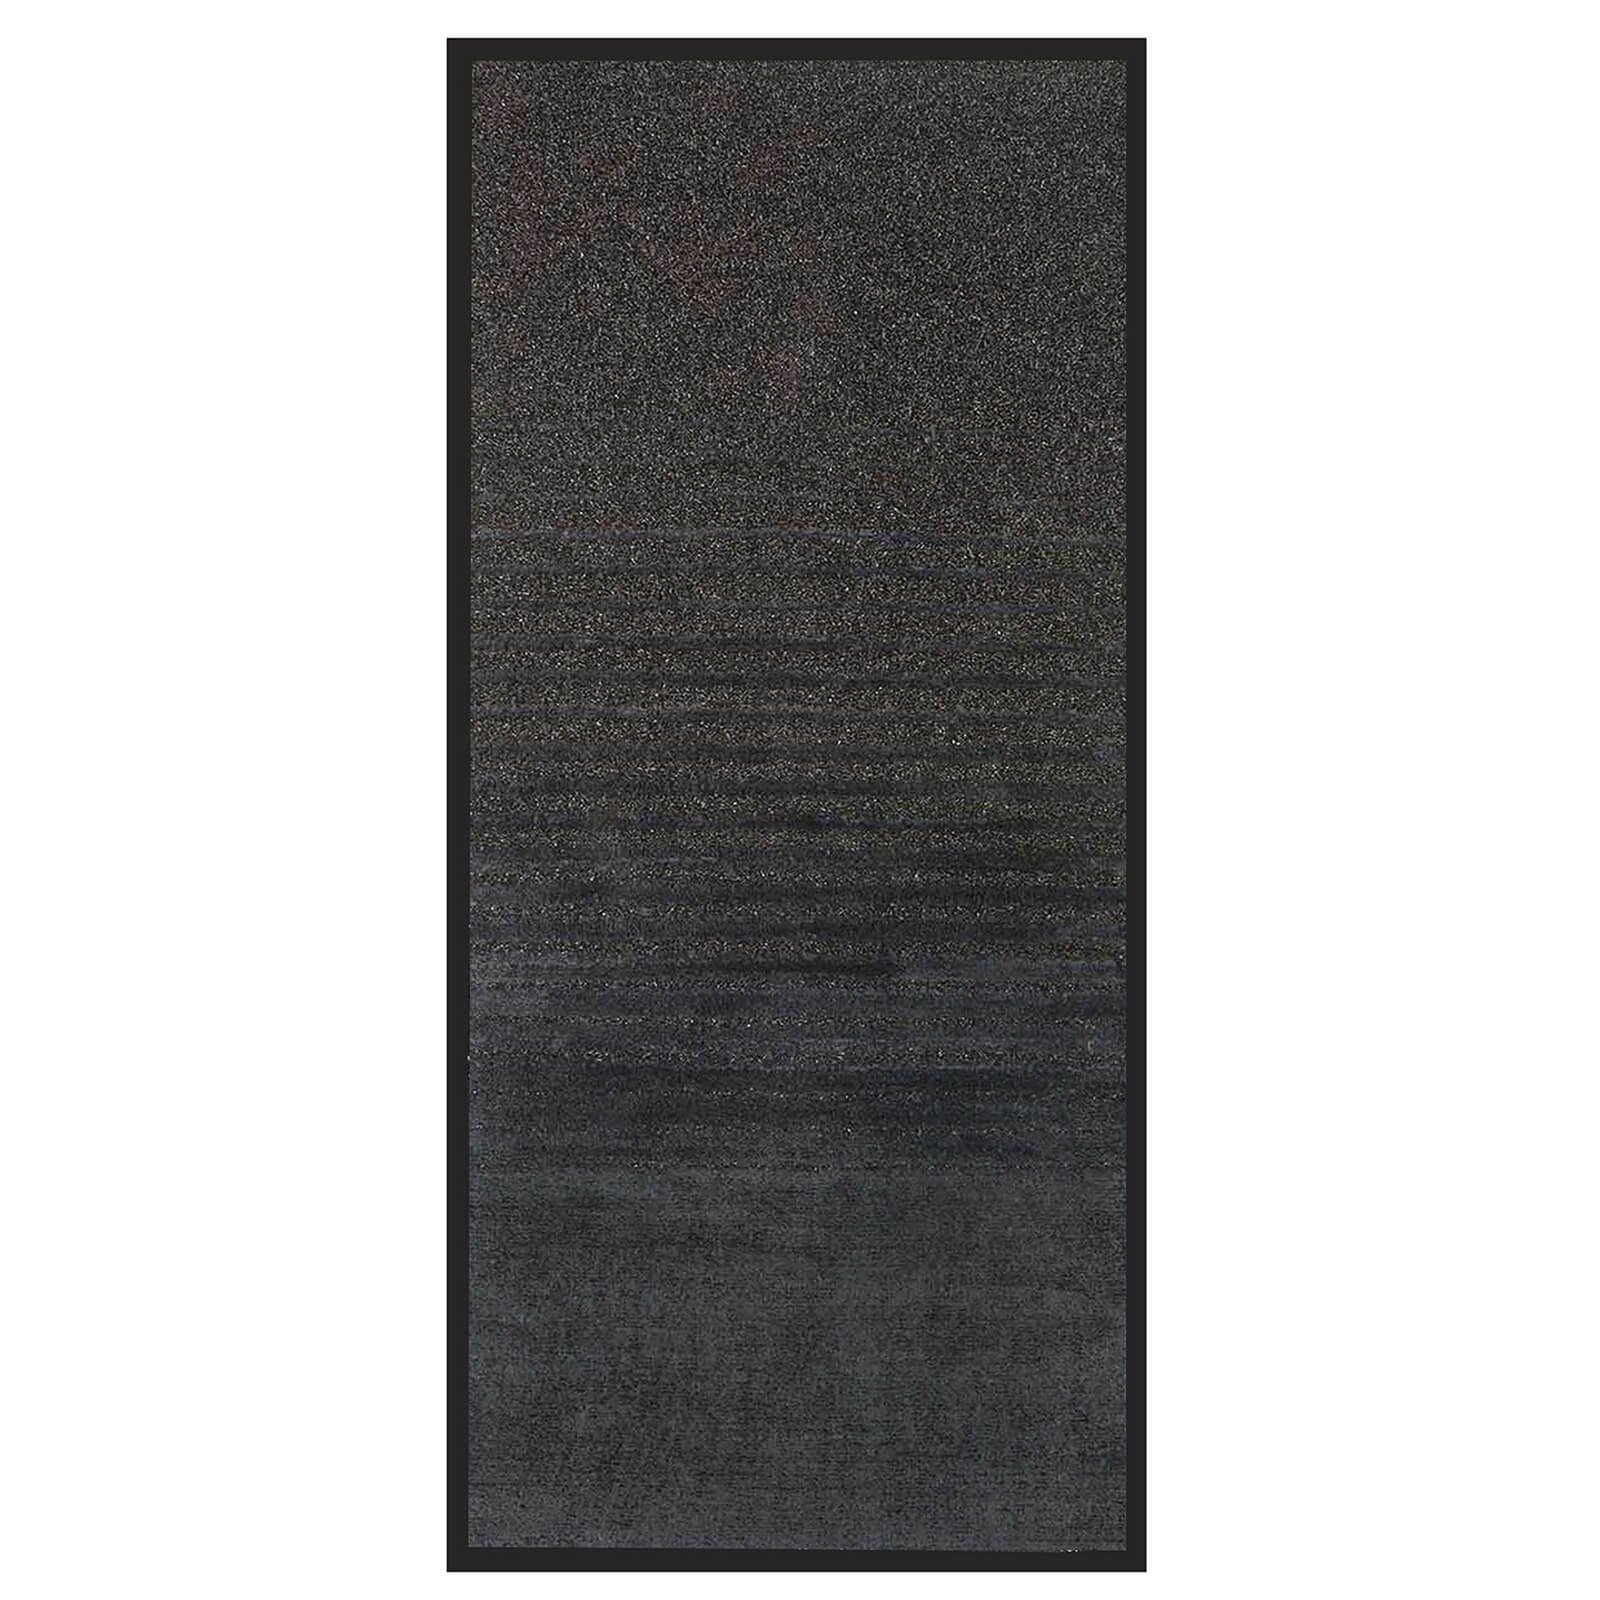 Photo of Combiclean Barrier Mat -black